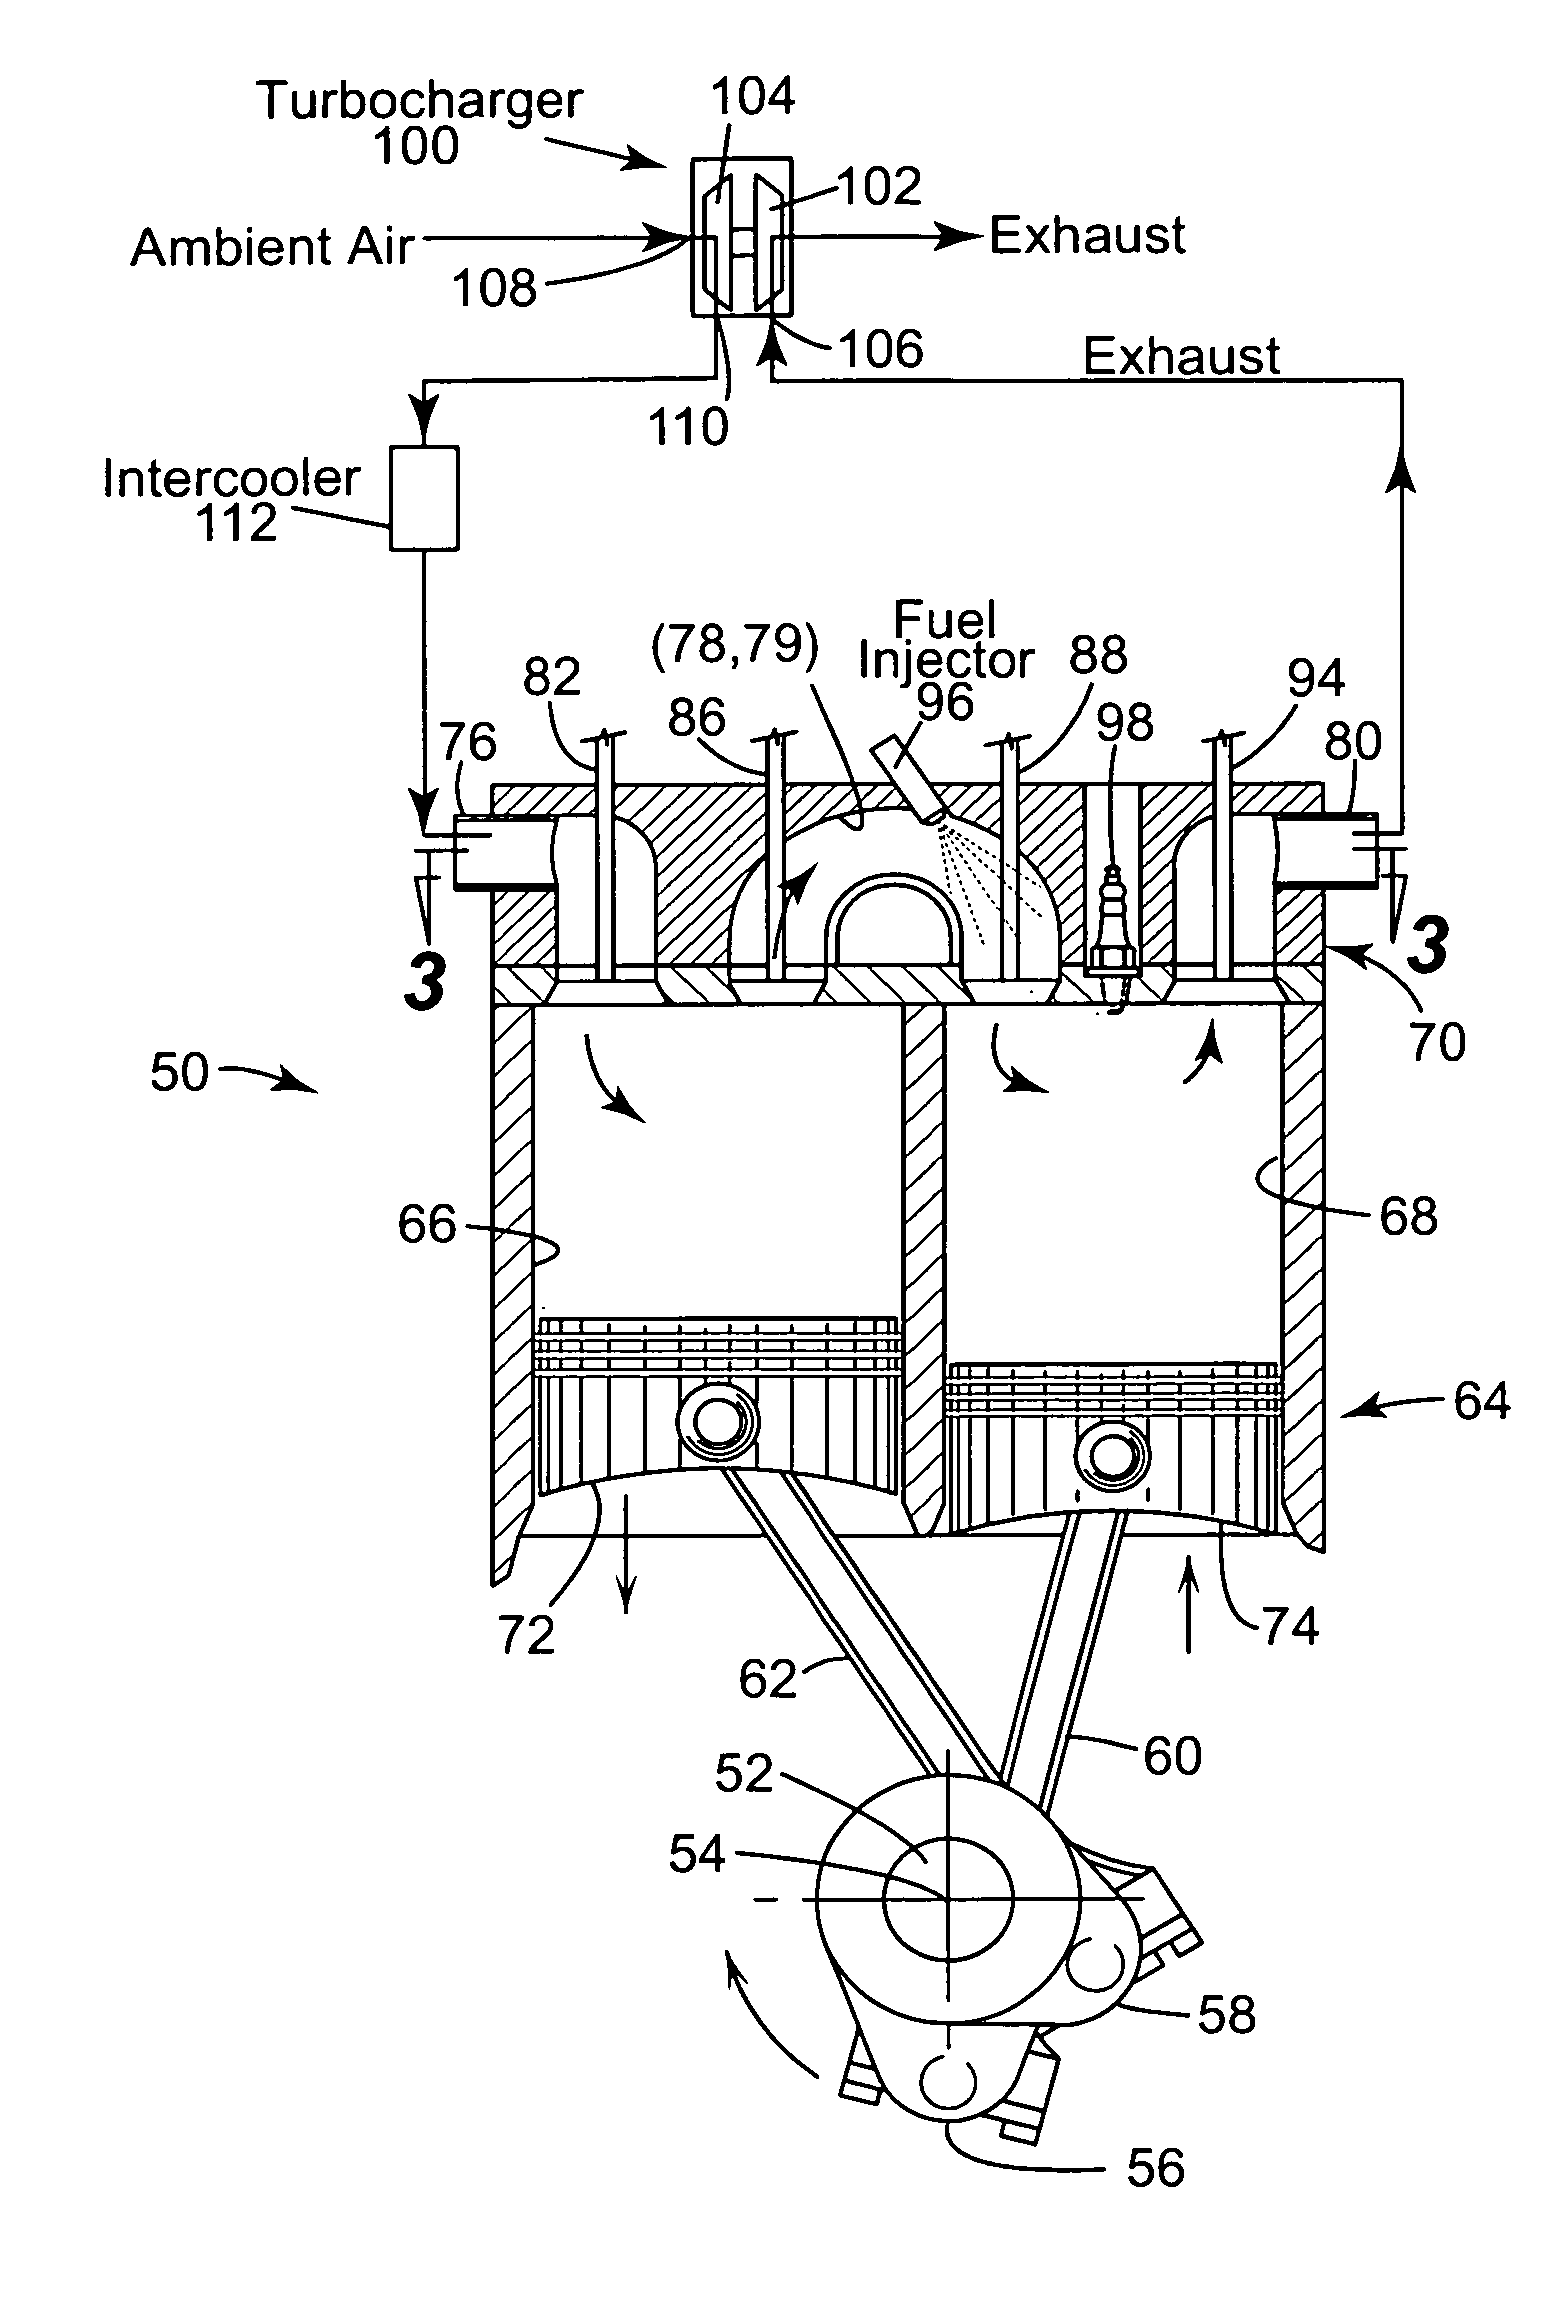 Knock resistant split-cycle engine and method